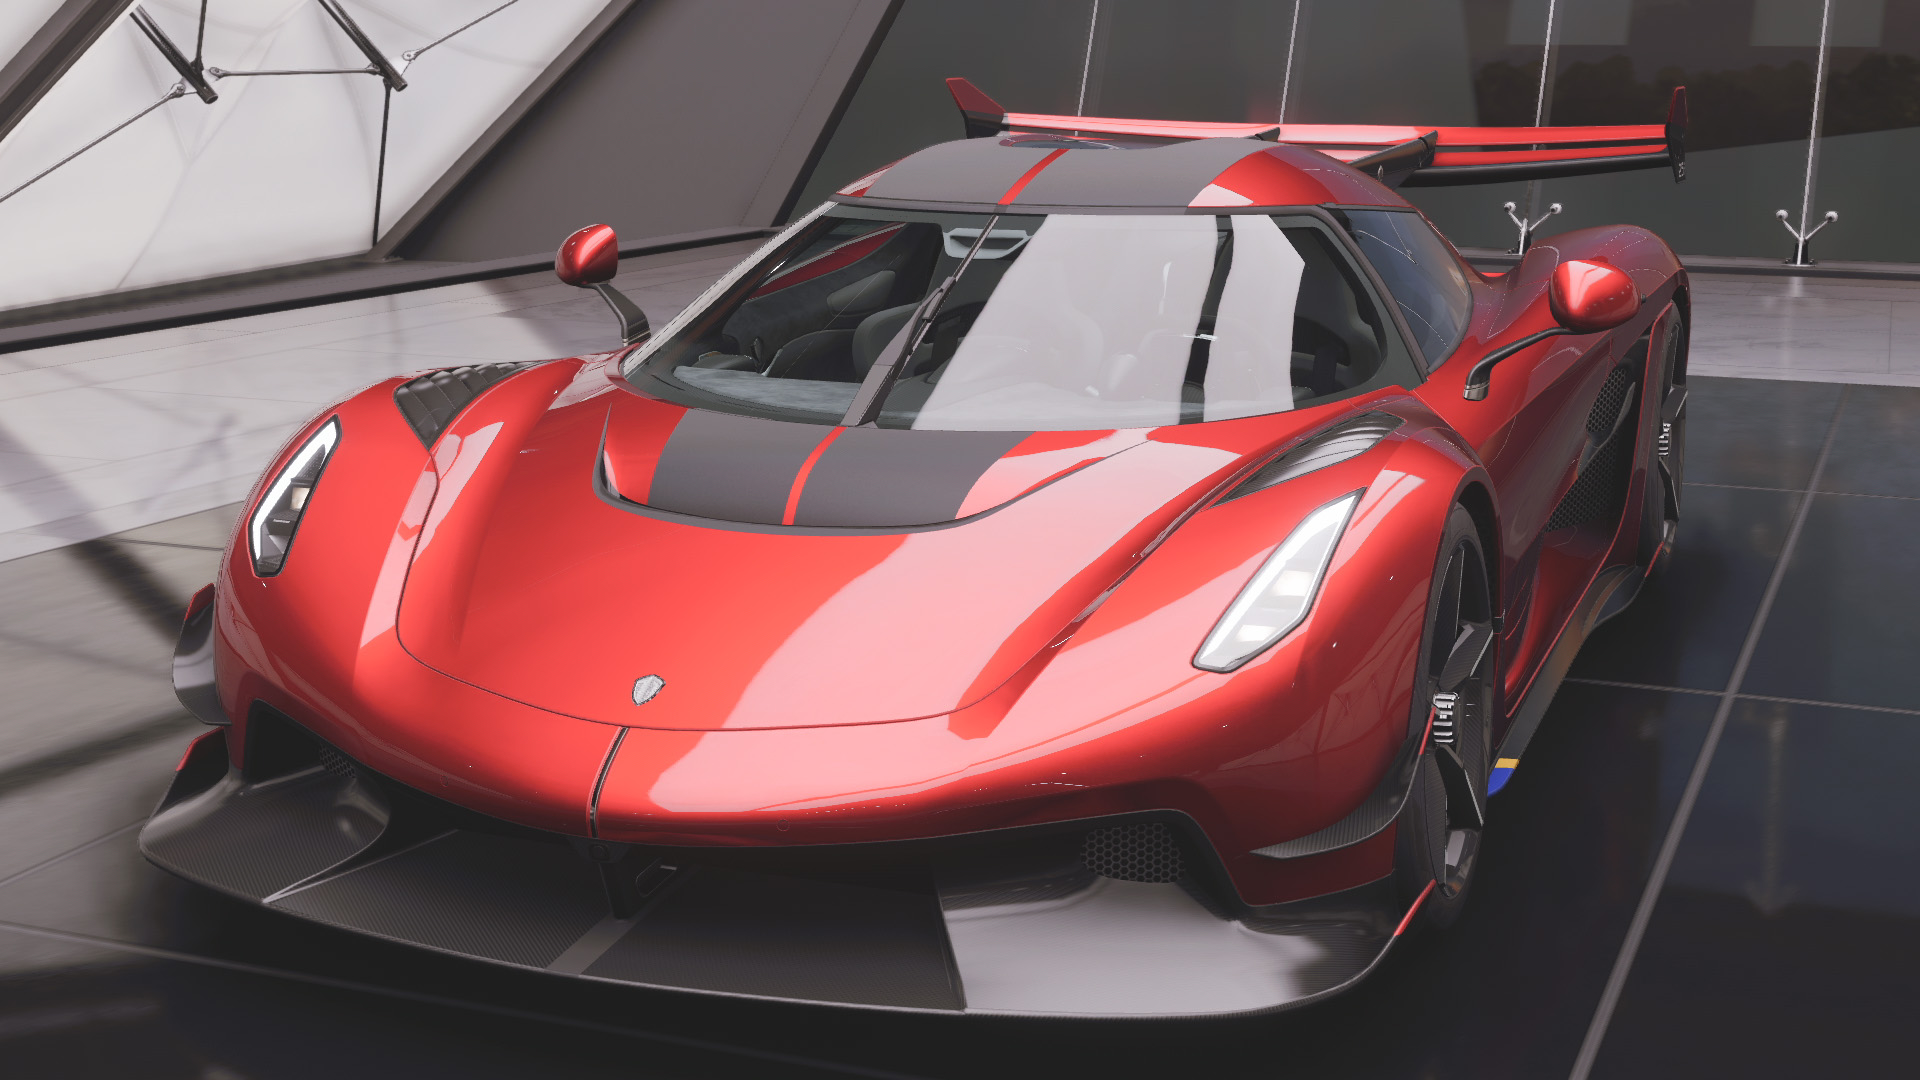  The fastest cars in Forza Horizon 5 